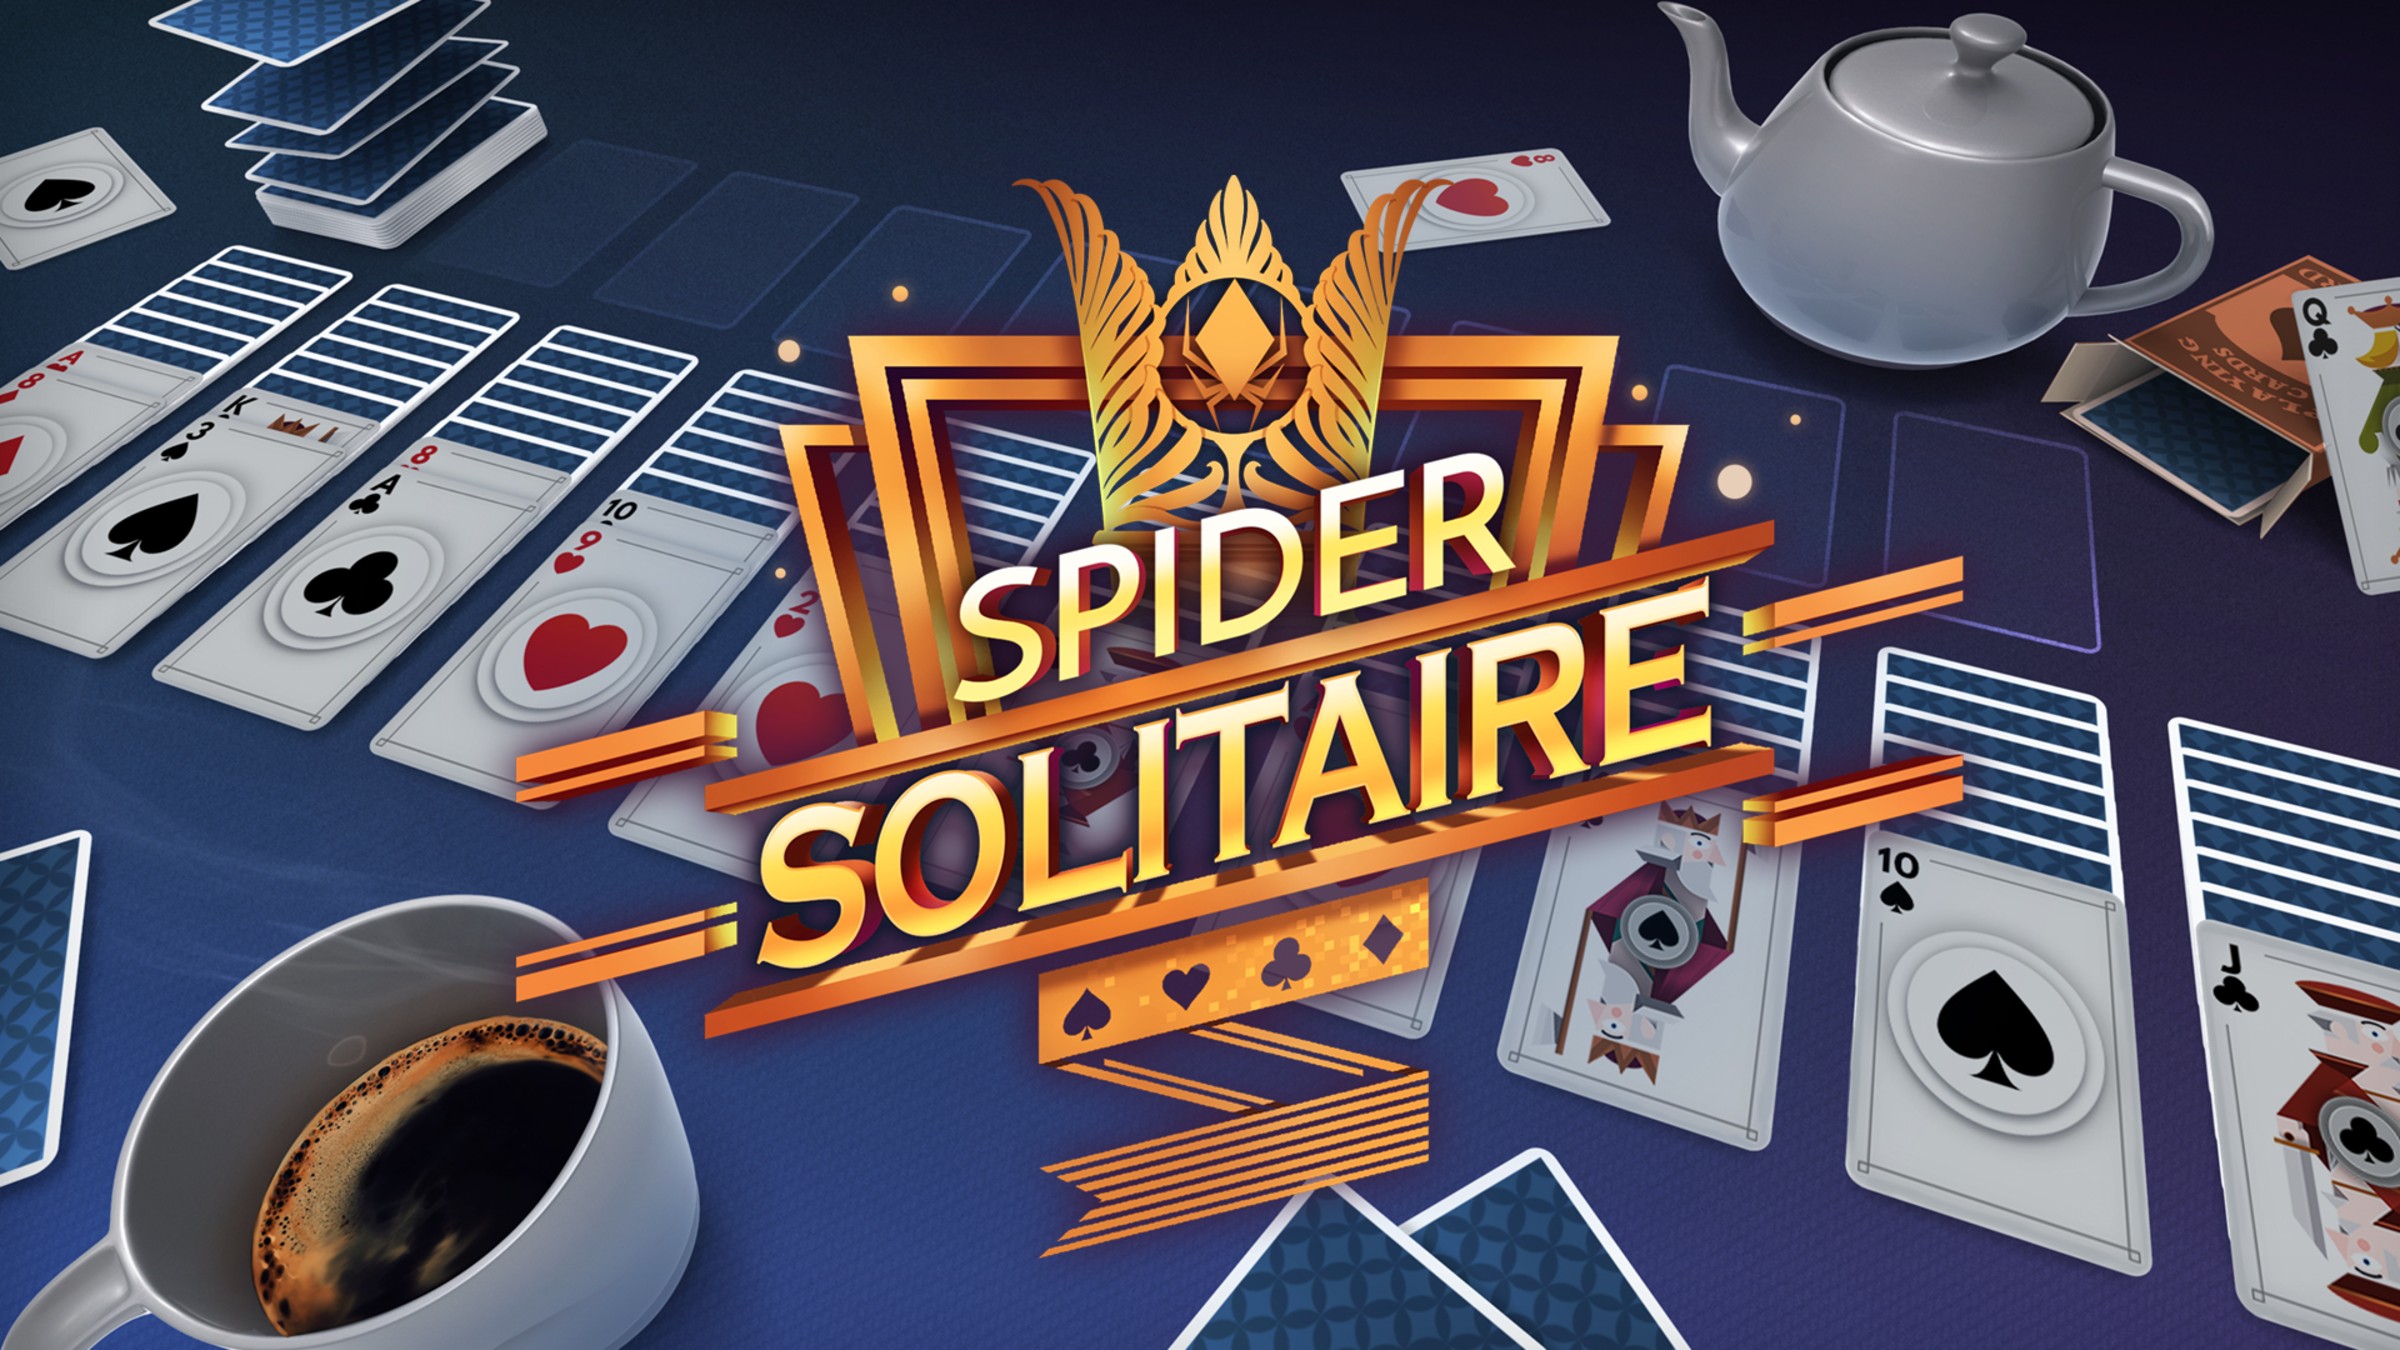 Spider Solitaire for Nintendo Switch - Nintendo Official Site